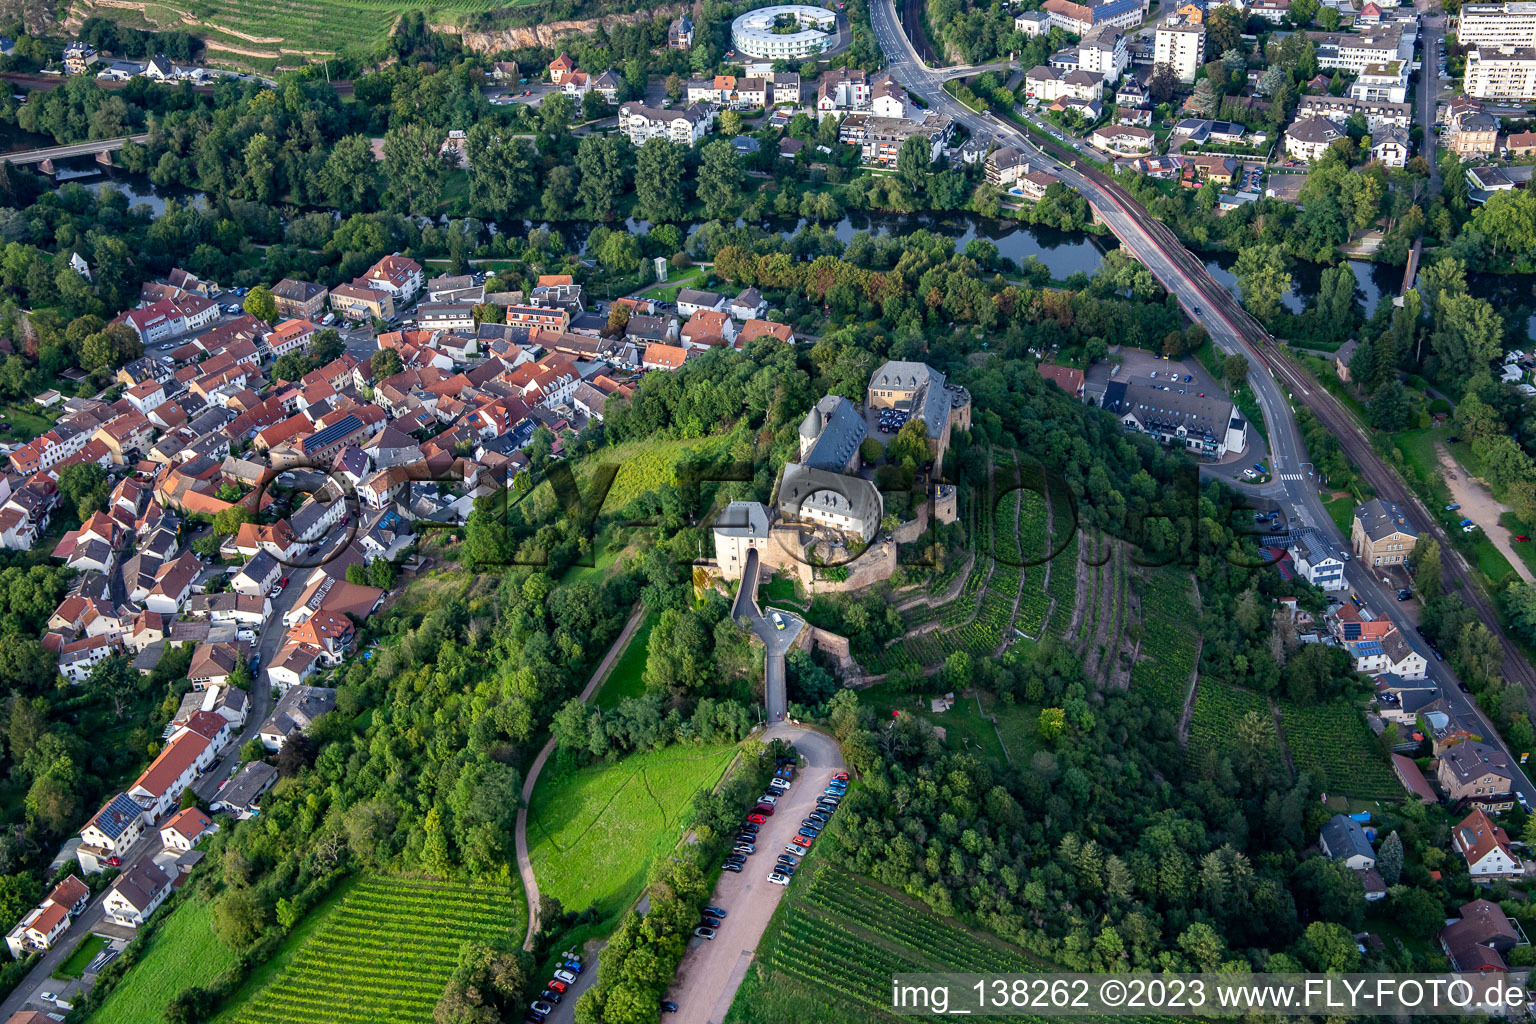 Castle Ebernburg / Protestant family holiday and educational center Ebernburg in the district Ebernburg in Bad Kreuznach in the state Rhineland-Palatinate, Germany out of the air